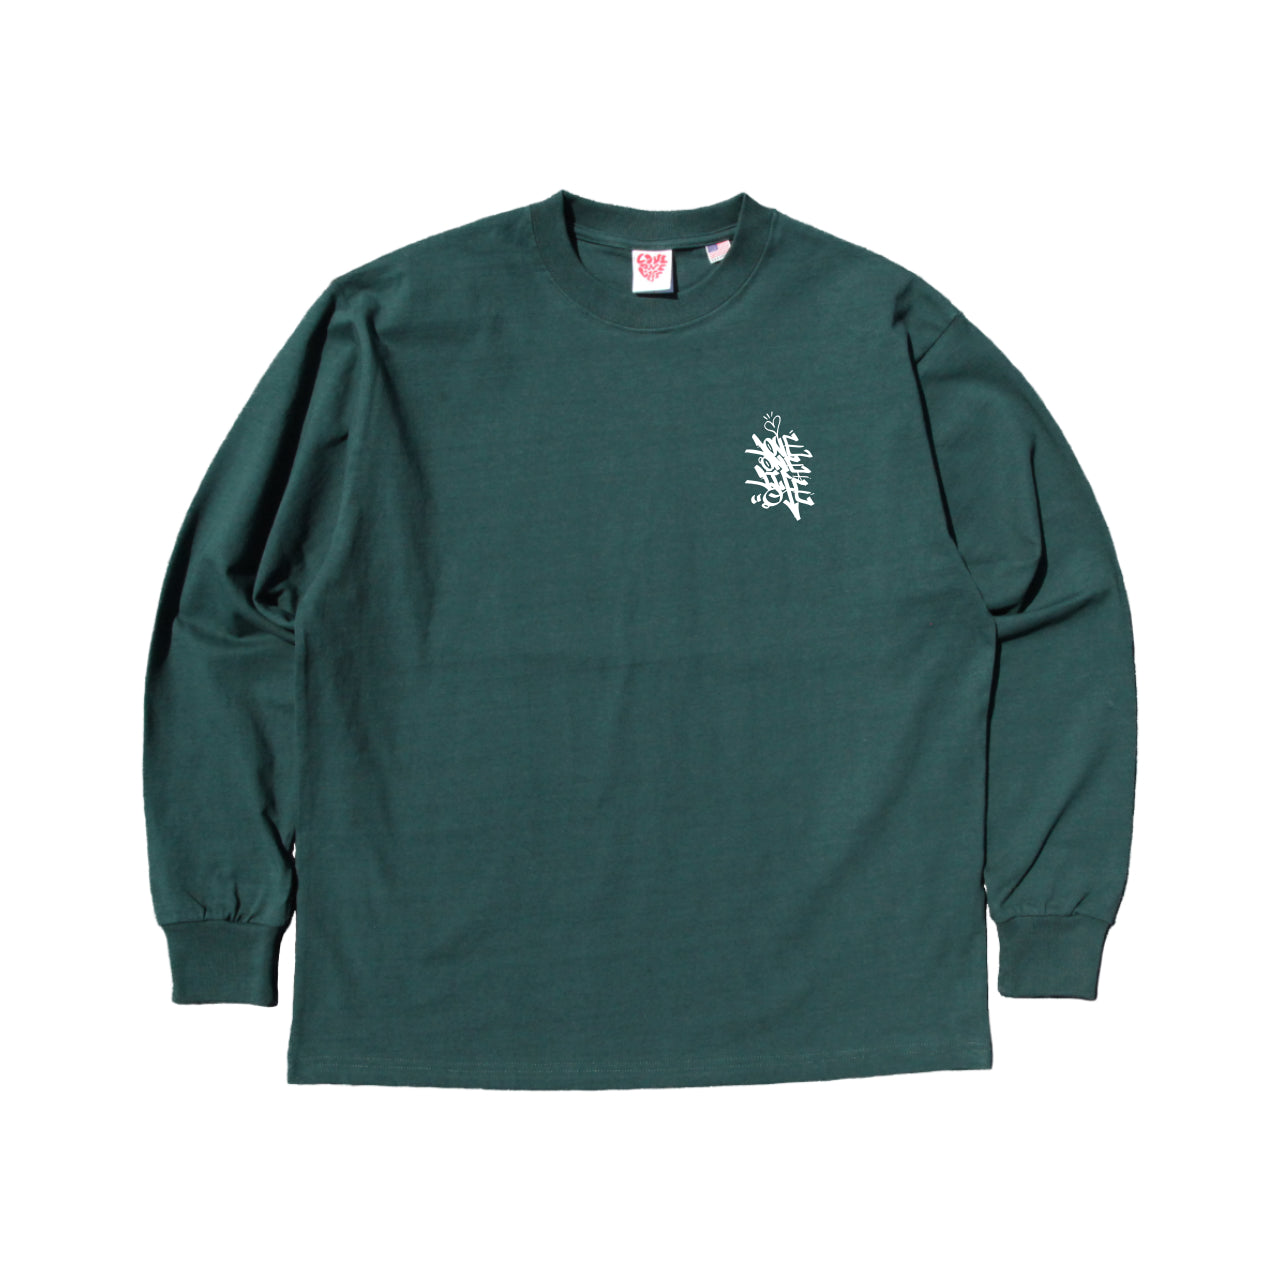 better soul tagging LS tee in deep green